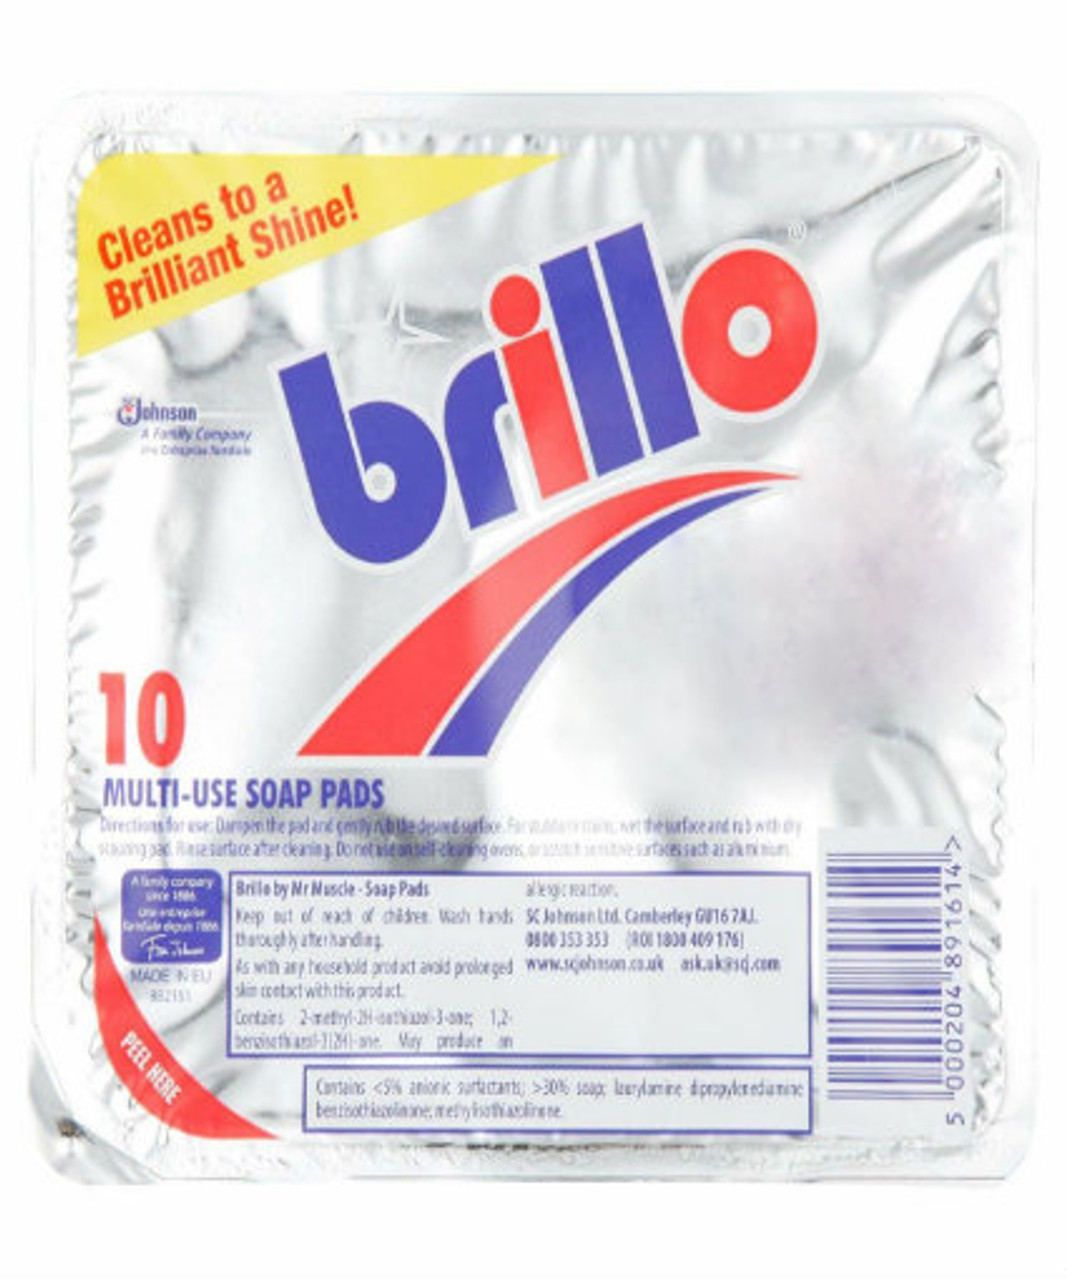 Brillo Pads x 10 Regency Foods Wholesaler and Supplier